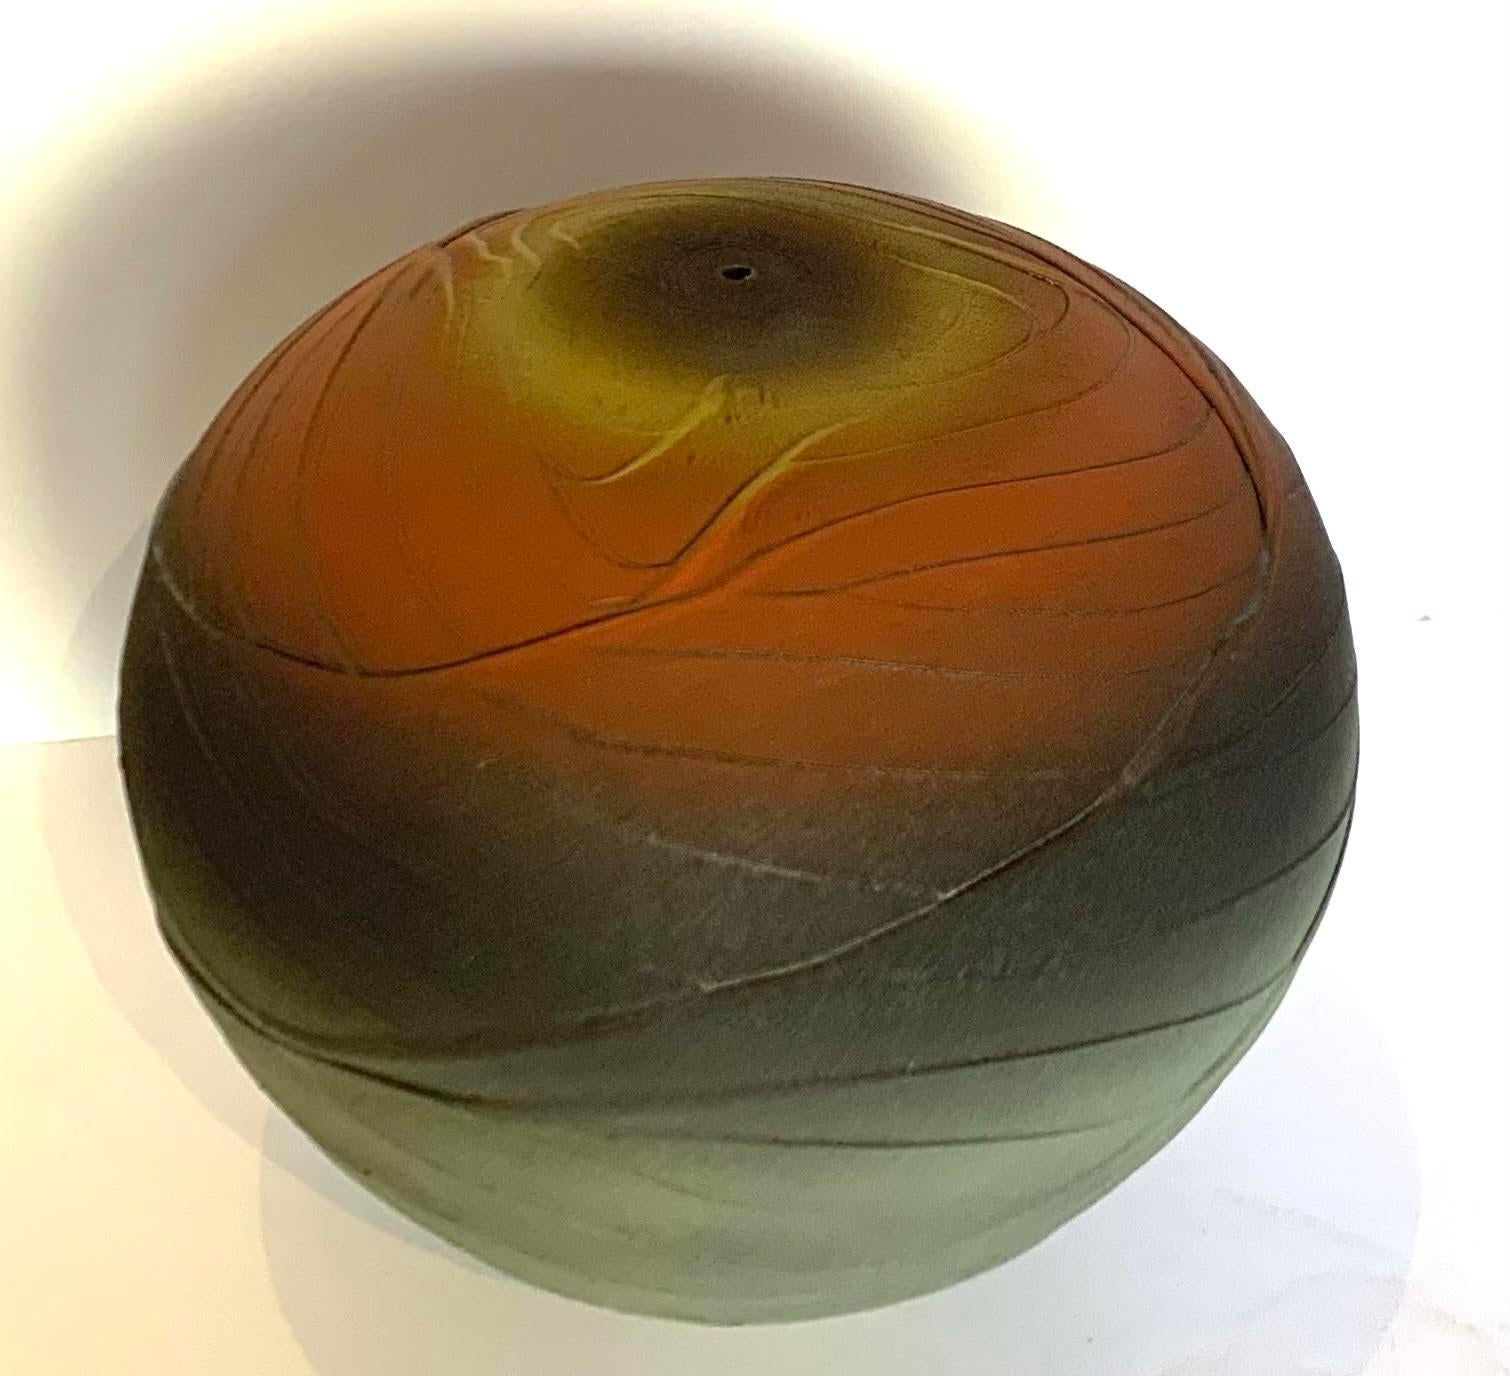 Contemporary textured ceramic earthenware vase.
Bands of brick red, grey and green blend into each other.
The glaze has a crackle effect giving it an ancient feel.
Tiny top spout.
Hand made one of a kind.
Part of a collection of earthenware